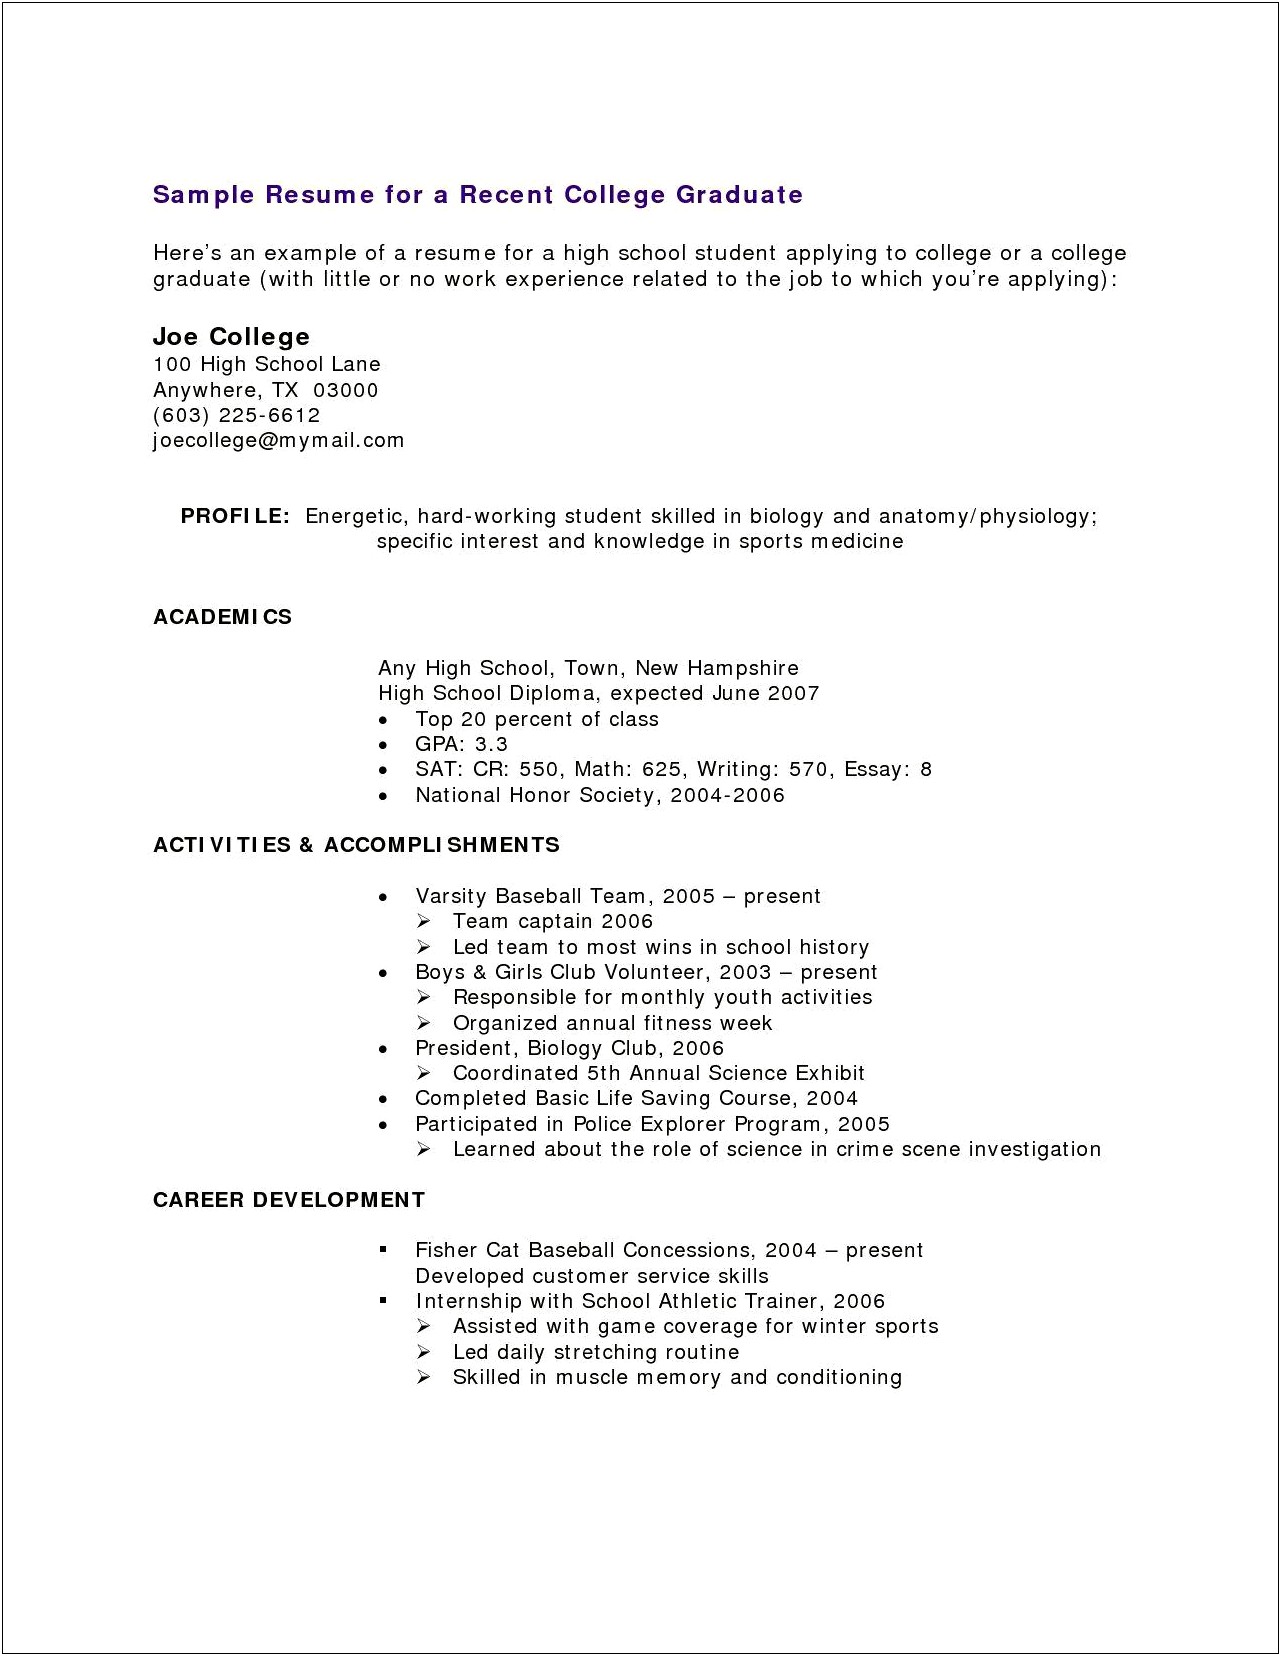 Resume With No Job Experience College Student